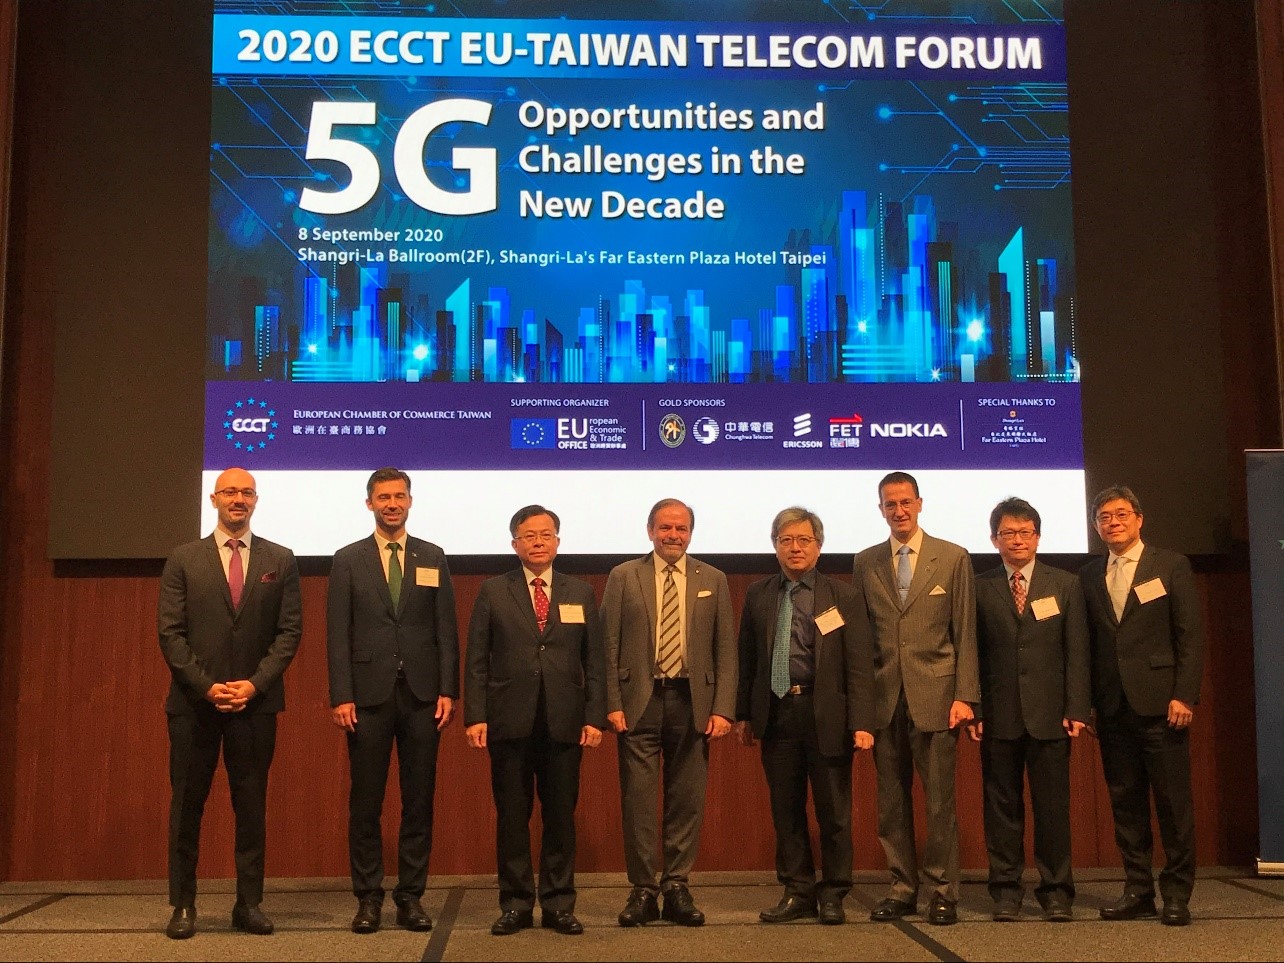 NCC Chairperson Yaw-Shyang Chen (third left), Mr. Giuseppe Izzo, Chairman of European Chamber of Commerce Taiwan(center left), Mr. Filip Grzegorzewski, Head of Office of European Economic and Trade Office(second left), Mr. Freddie Höglund, CEO of ECCT(third right) , Dr. Zse-hong Tsai, Executive Secretary of Office of Science & Technology of Board of Science and Technology, Executive Yuan(center right),Mr. Hong-wei Jyang, Director of Department of Cyber Security(second right).